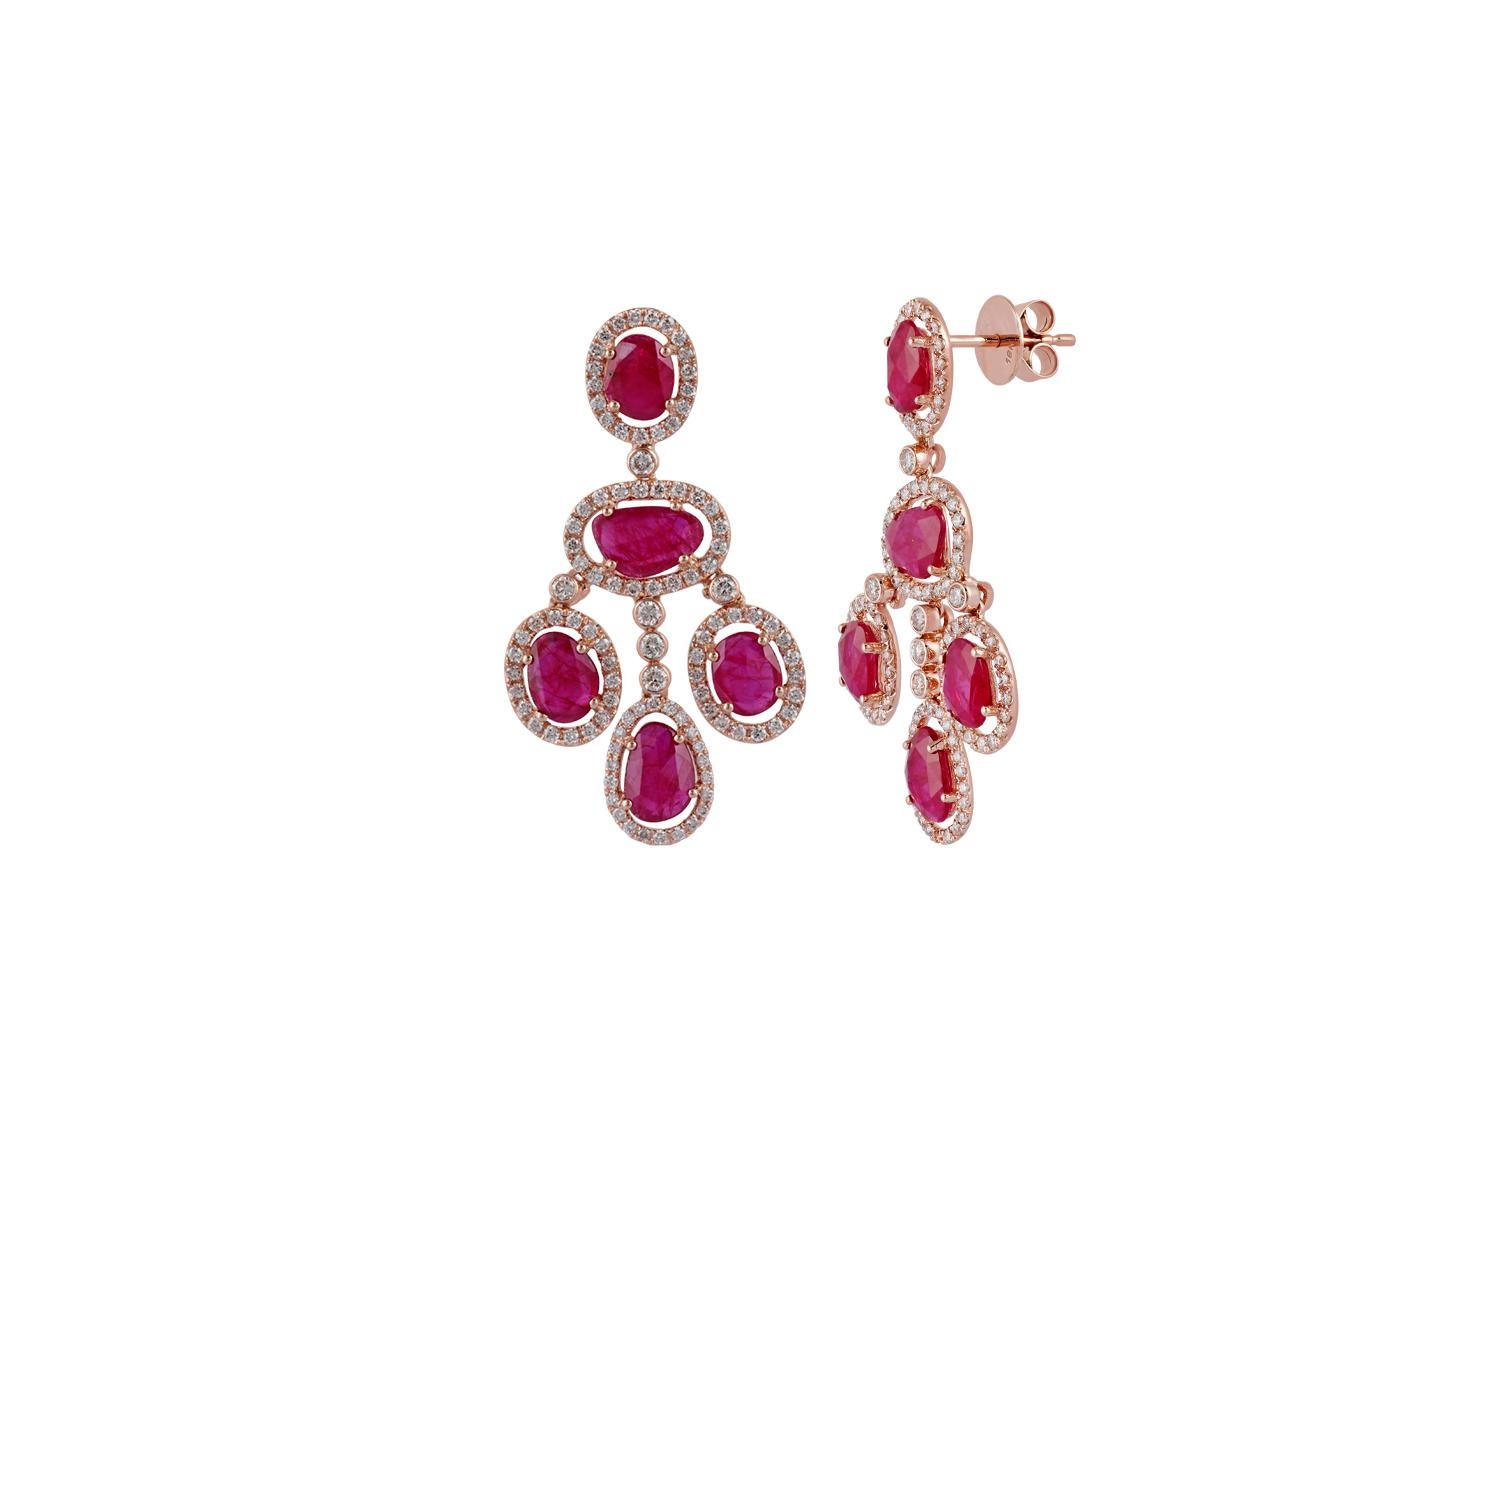 Contemporary Ruby and Diamond Earrings Studded in 18 Karat Rose Gold